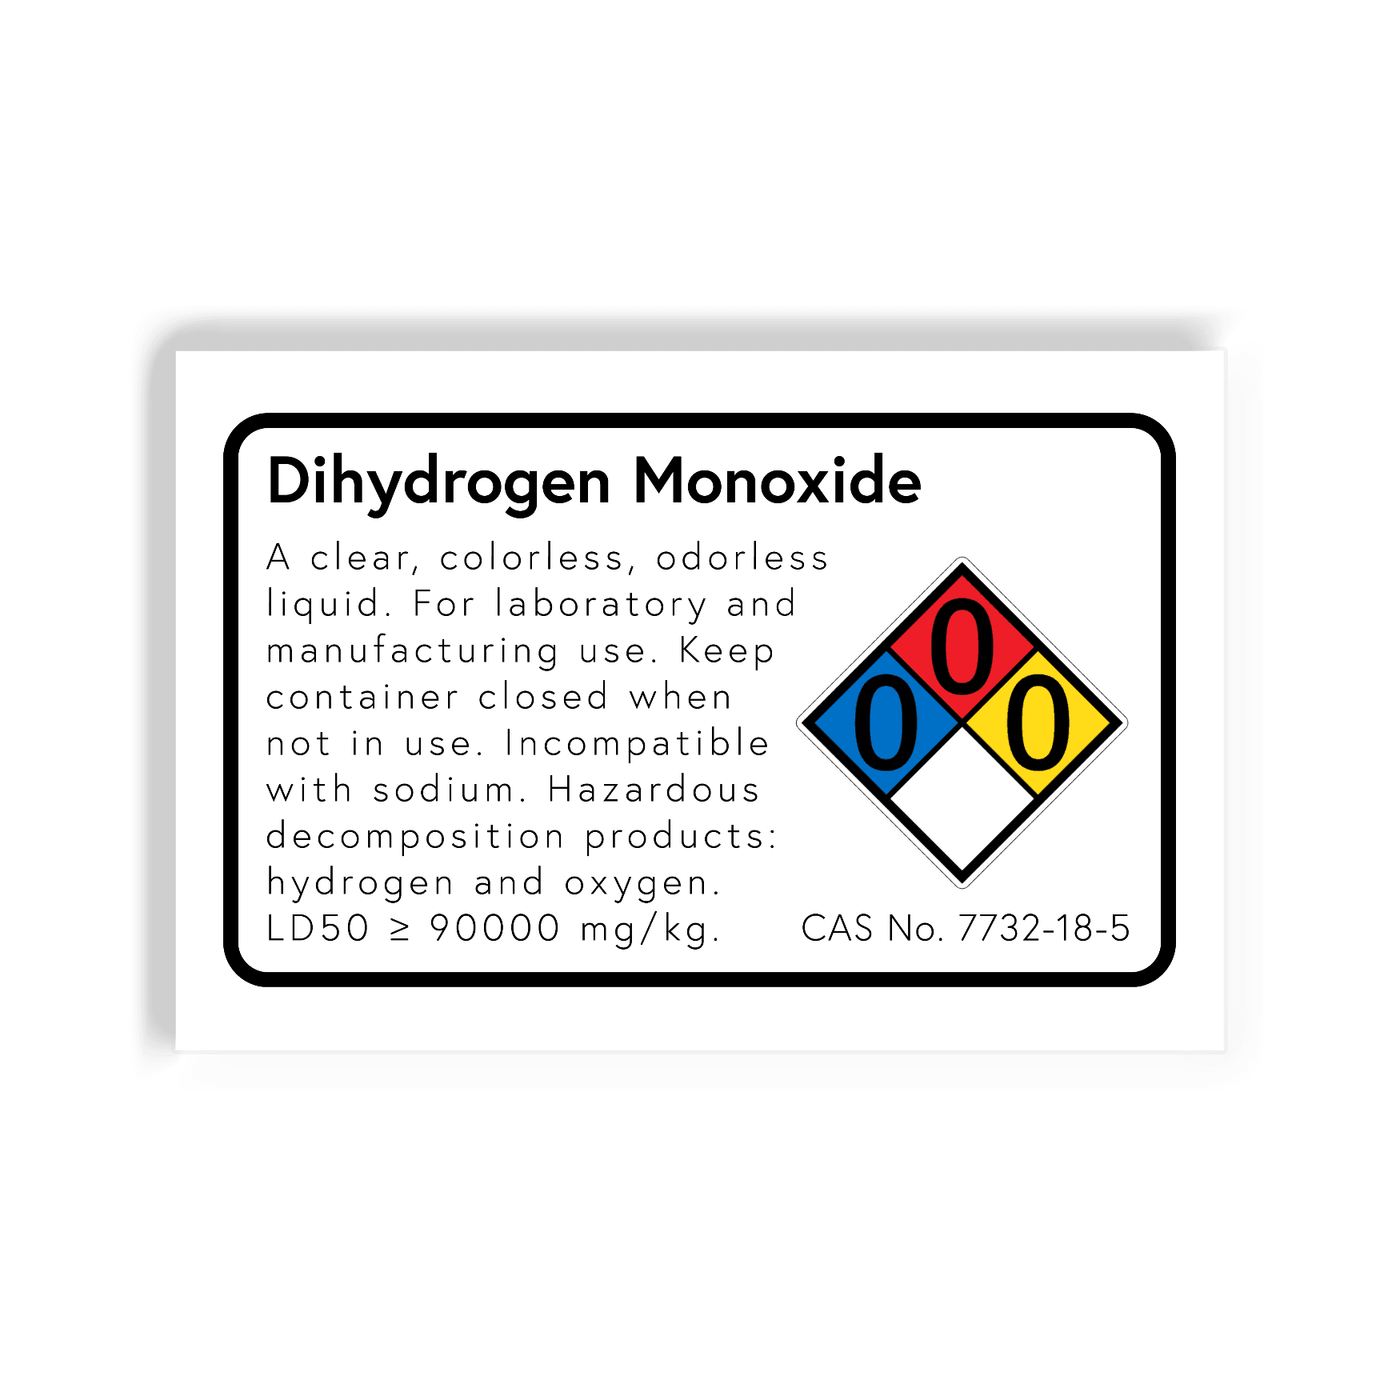 2x3 colorful magnet with image of a chemical information label for dihydrogen monoxide